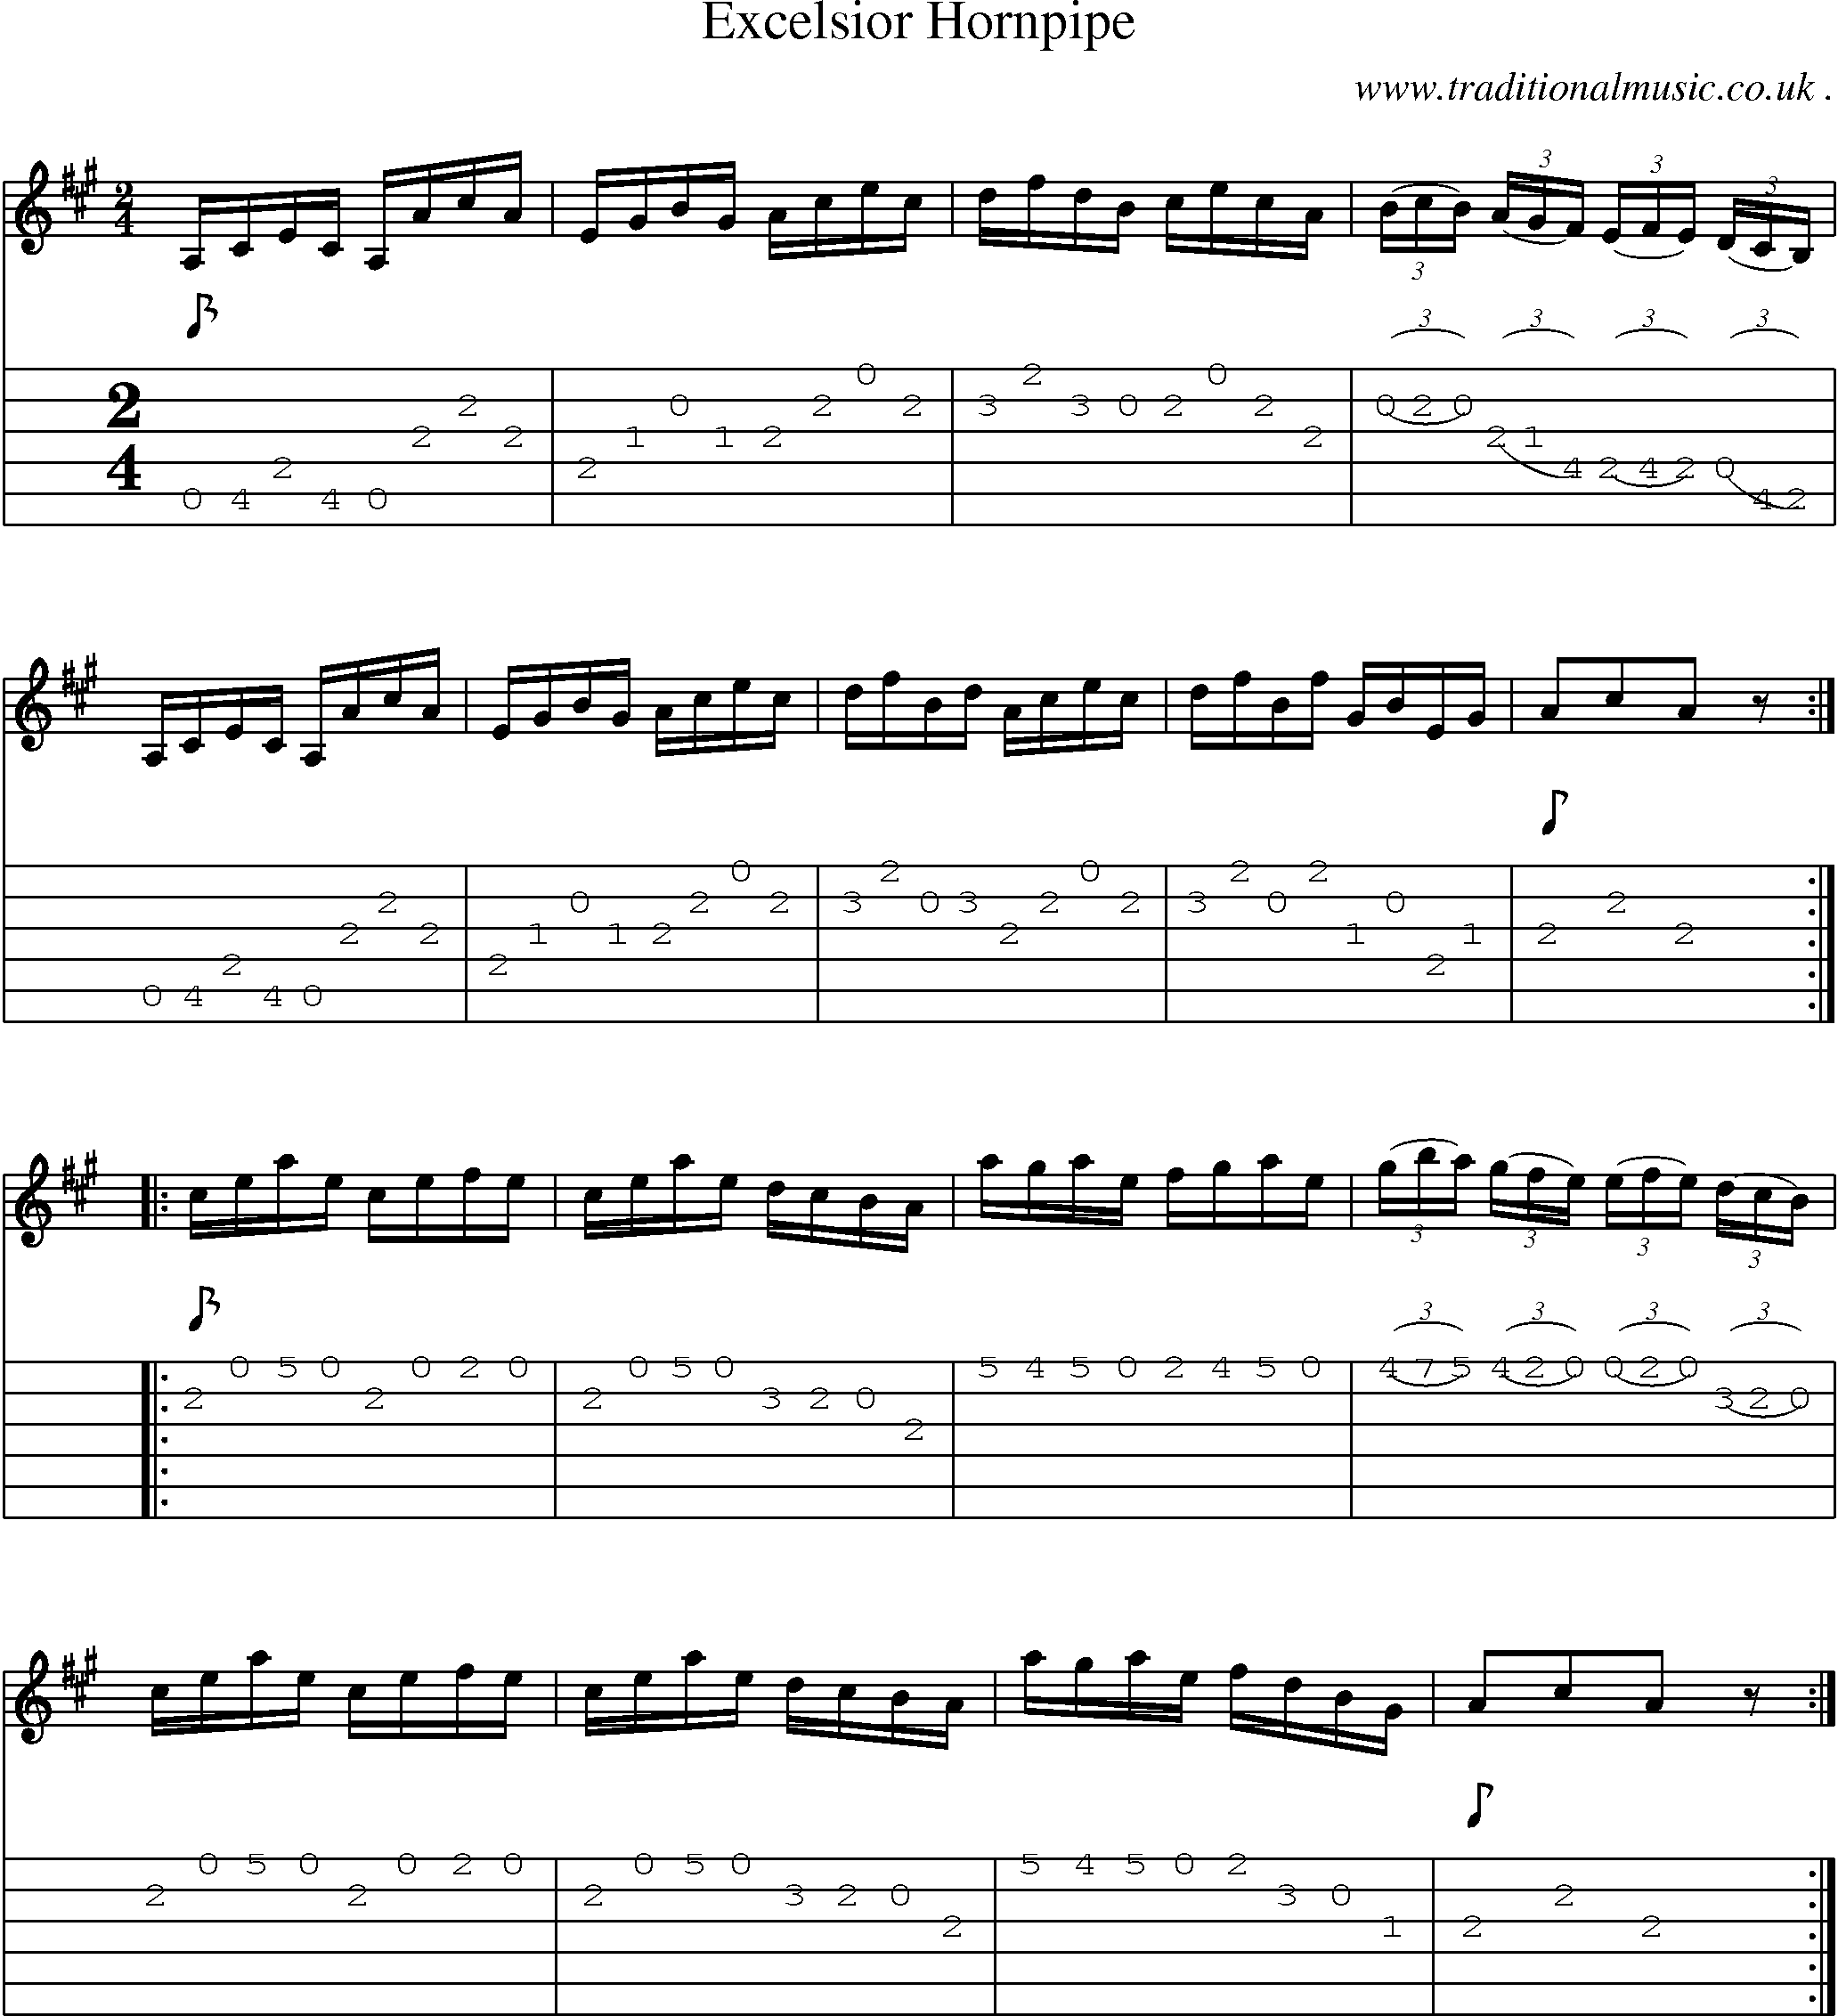 Sheet-Music and Guitar Tabs for Excelsior Hornpipe